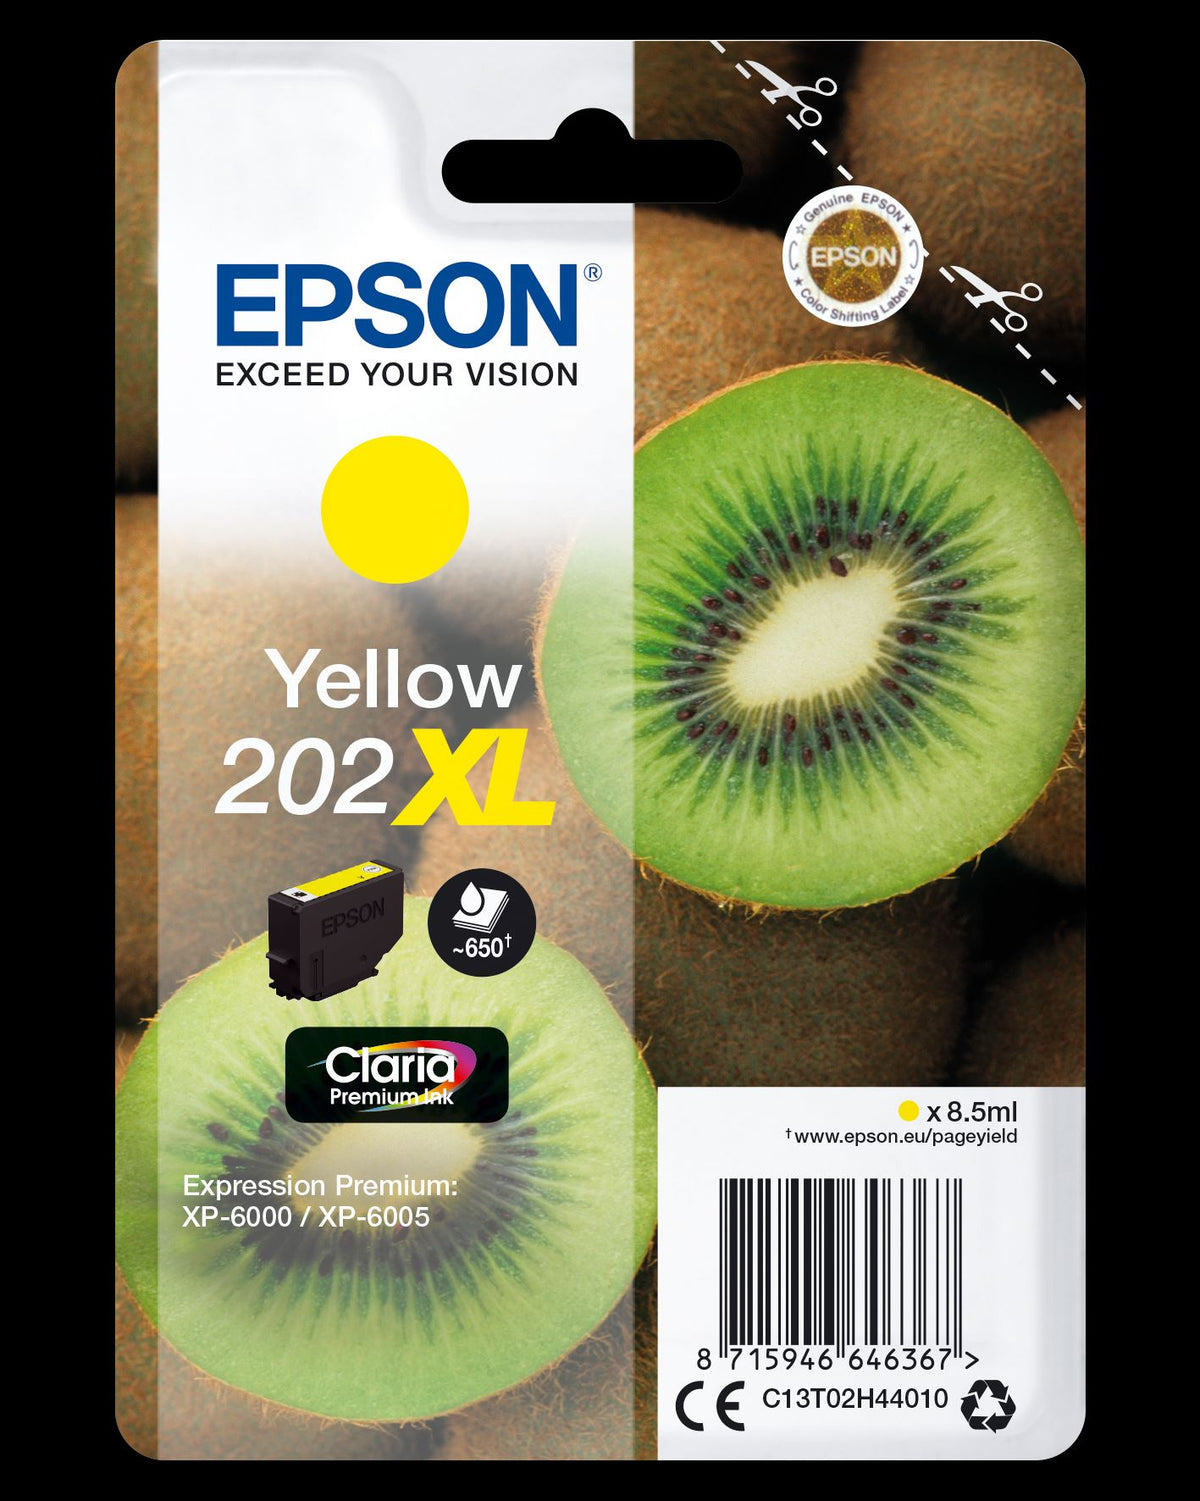 Epson C13T02H44010/202XL Ink cartridge yellow high-capacity, 650 pages 8,5ml for Epson XP 6000